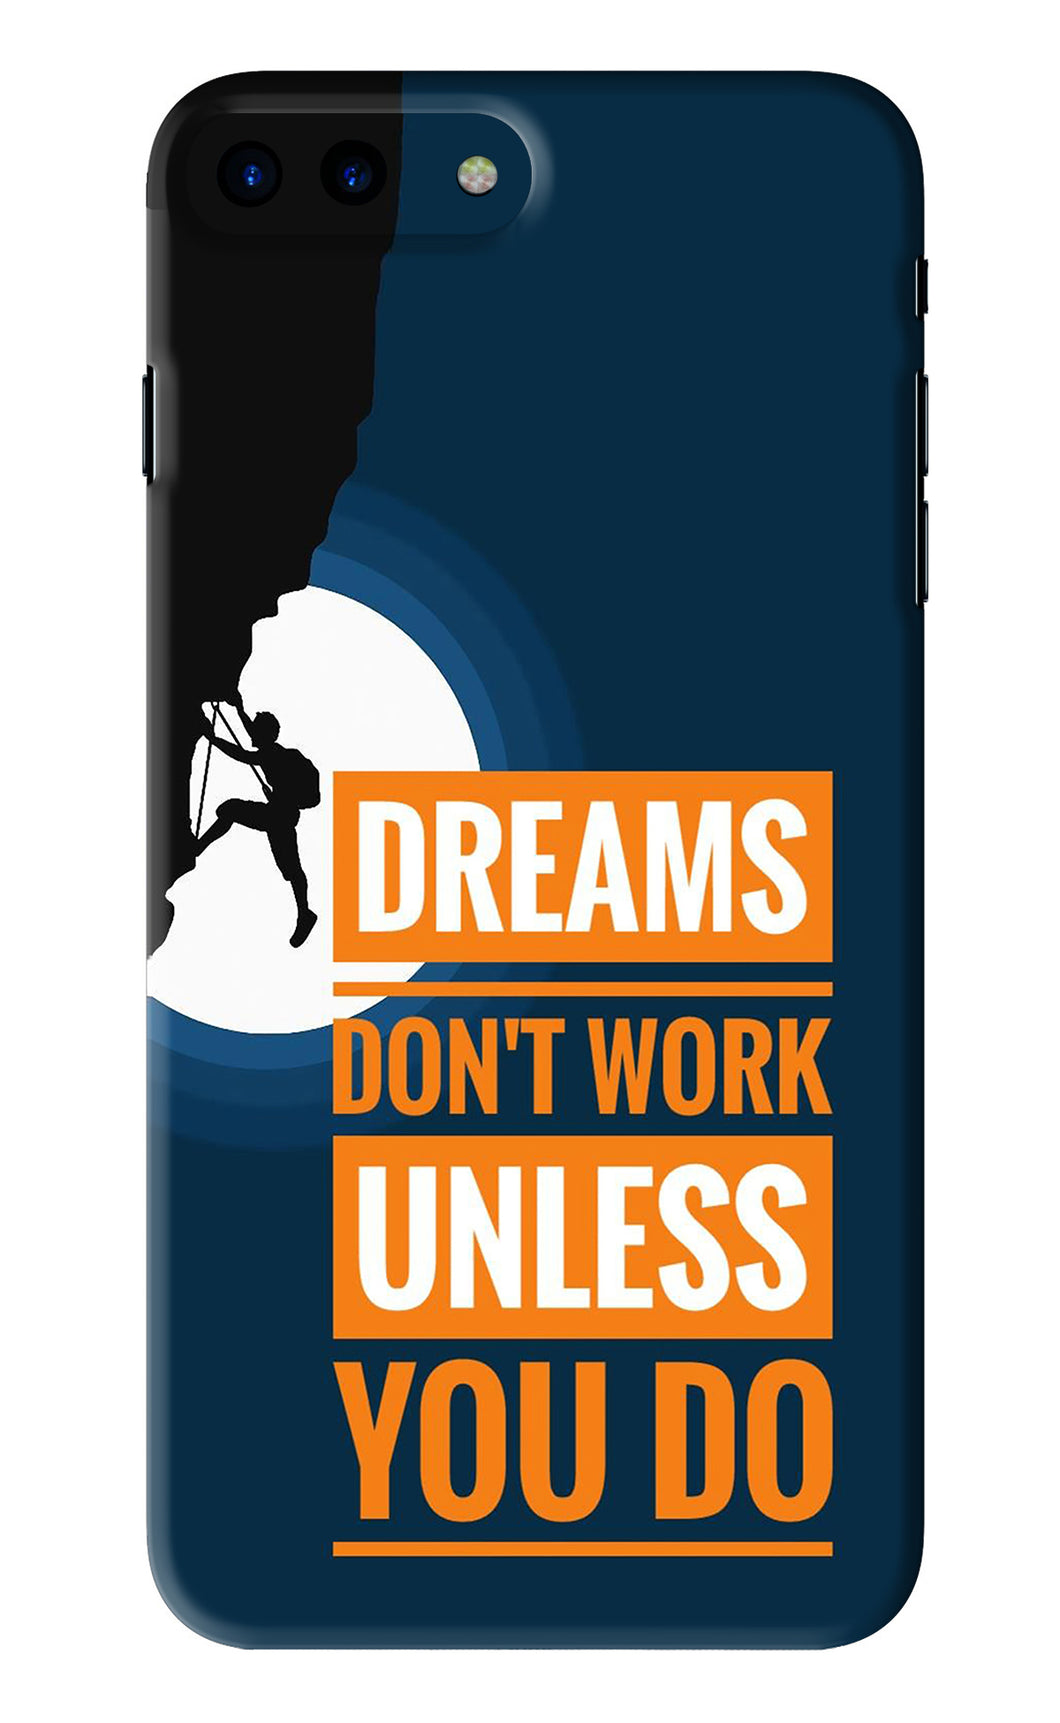 Dreams Don’T Work Unless You Do iPhone 7 Plus Back Skin Wrap